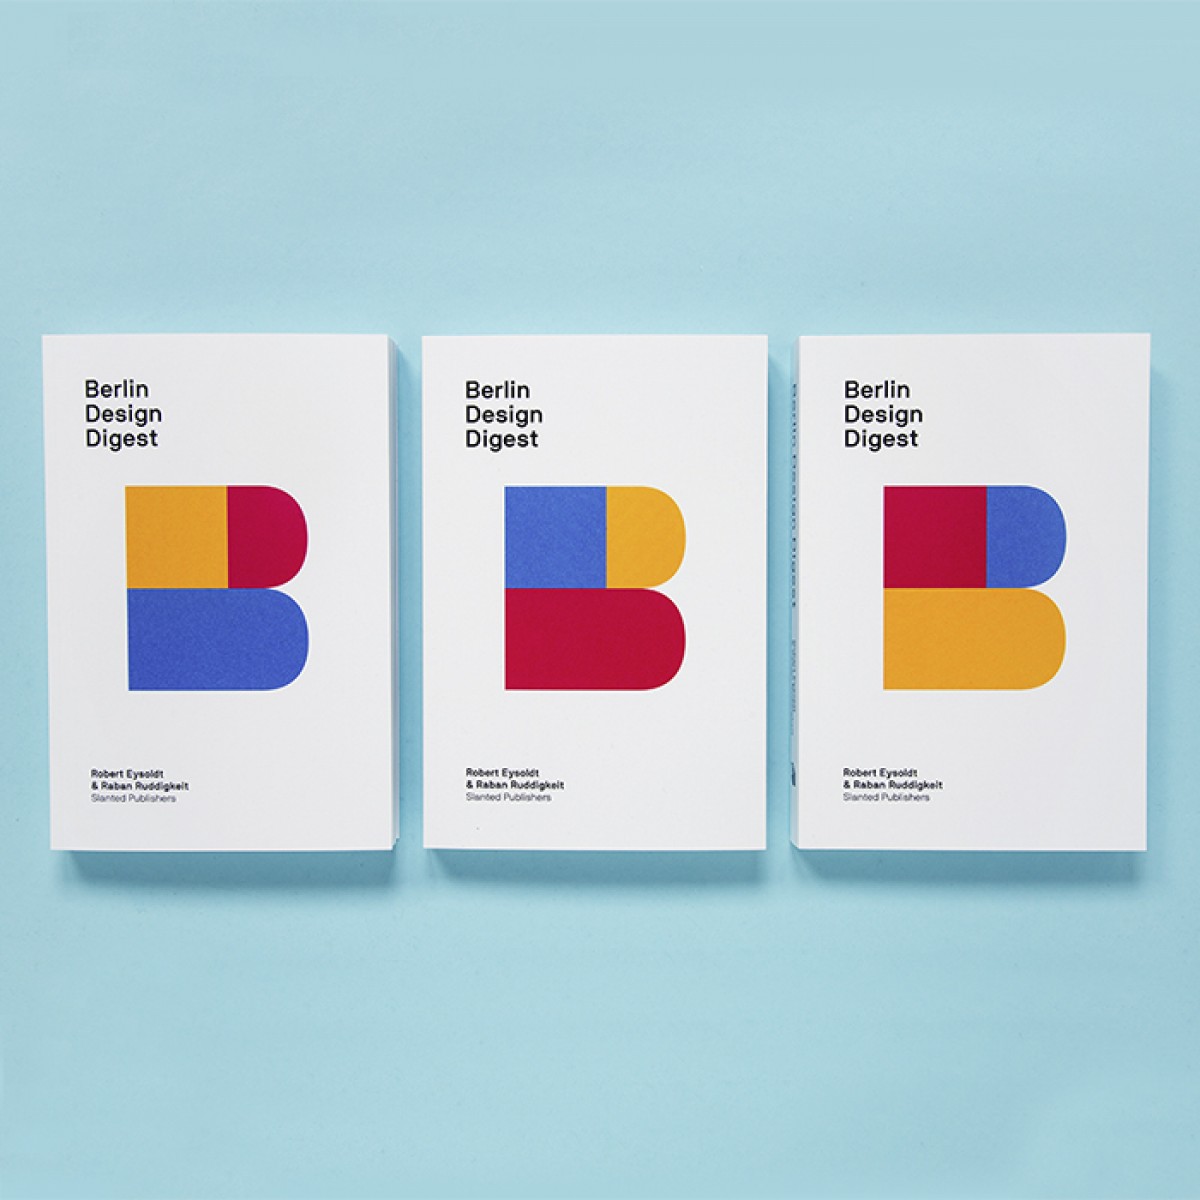 Berlin Design Digest – 100 successful projects, products, and processes 